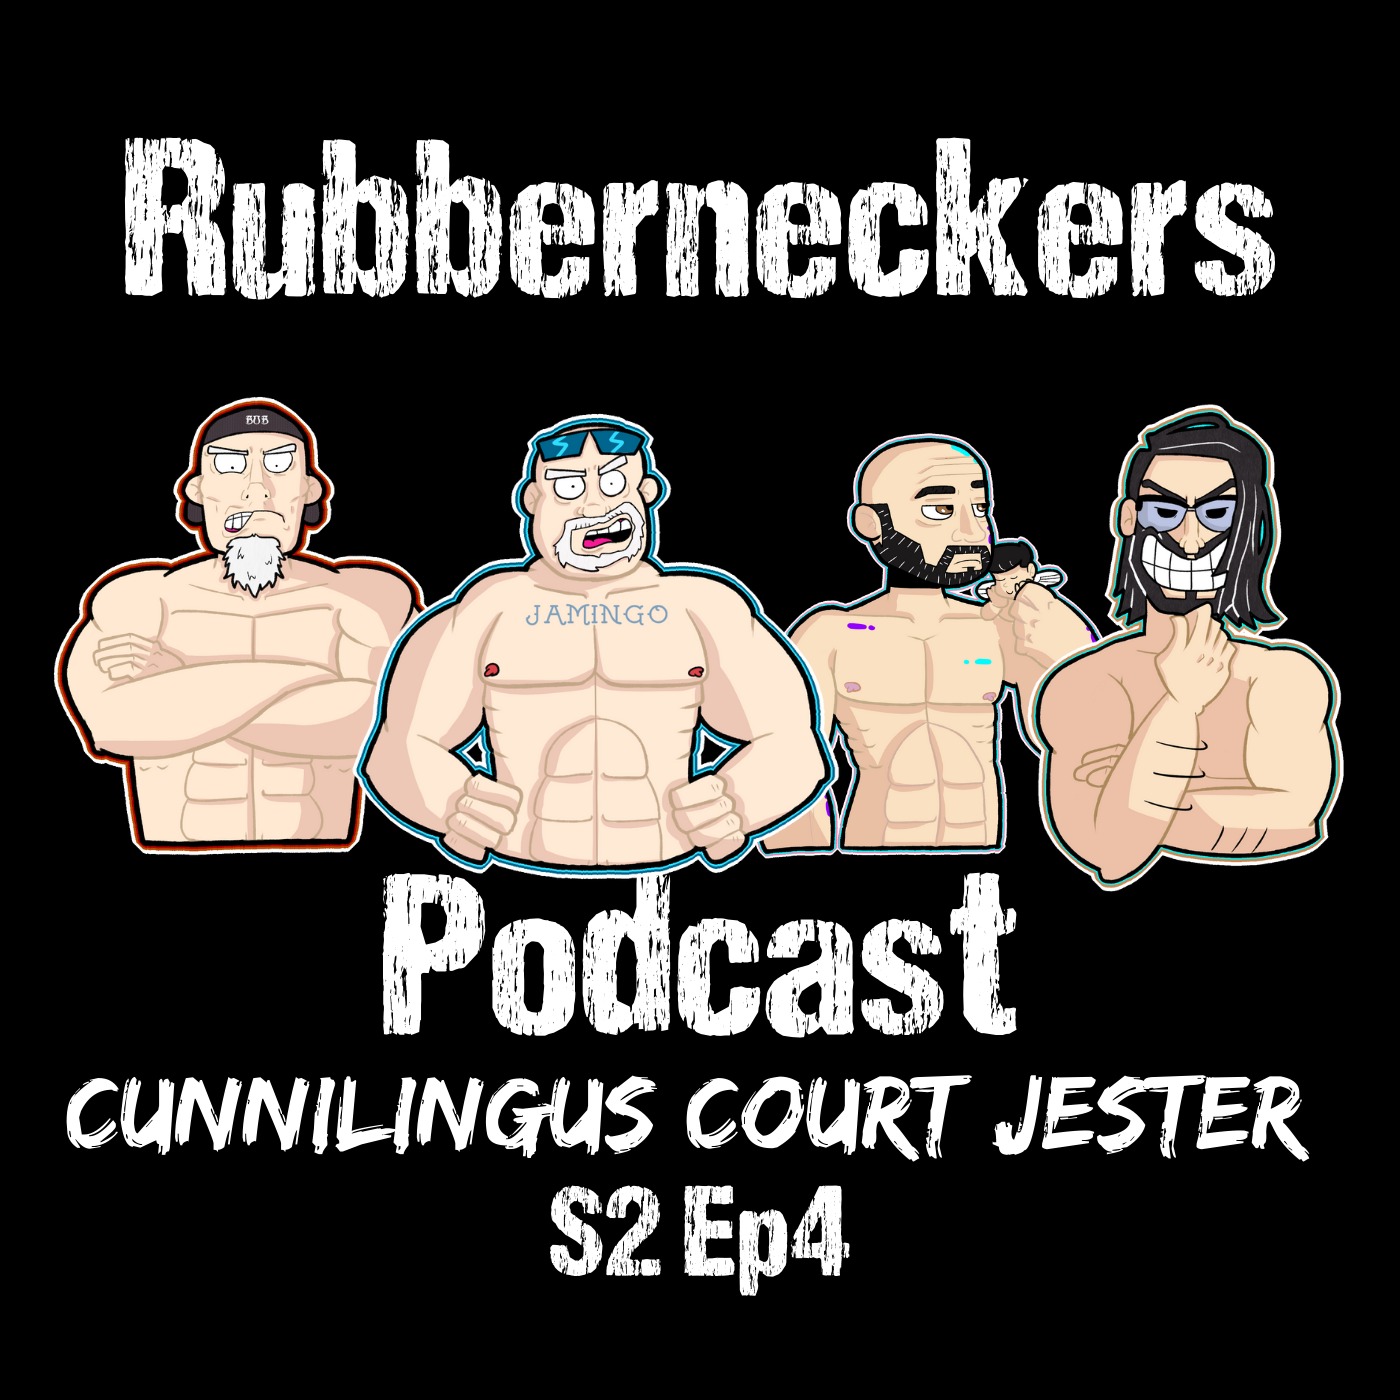 Cunnilingus Court Jester | S2 Ep4 Image